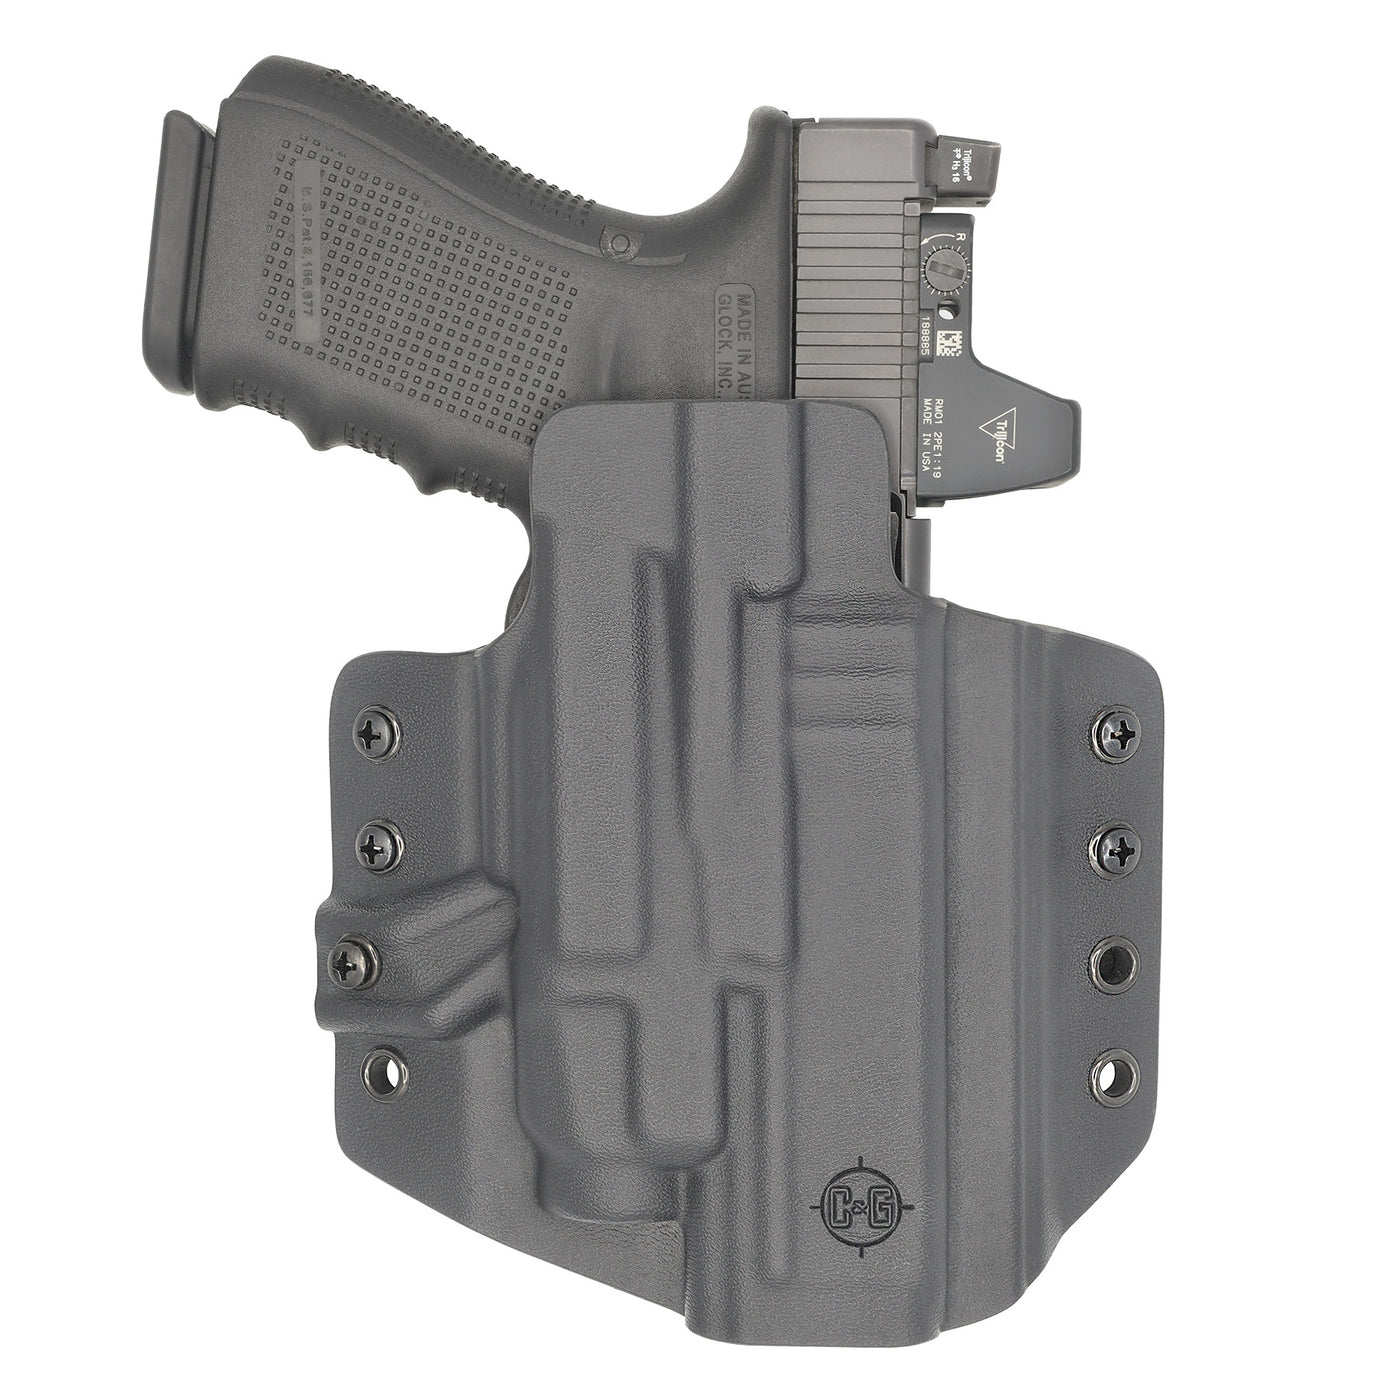 C&G Holsters Custom OWB Tactical Glock 19/23 Streamlight TLR7 in holstered position